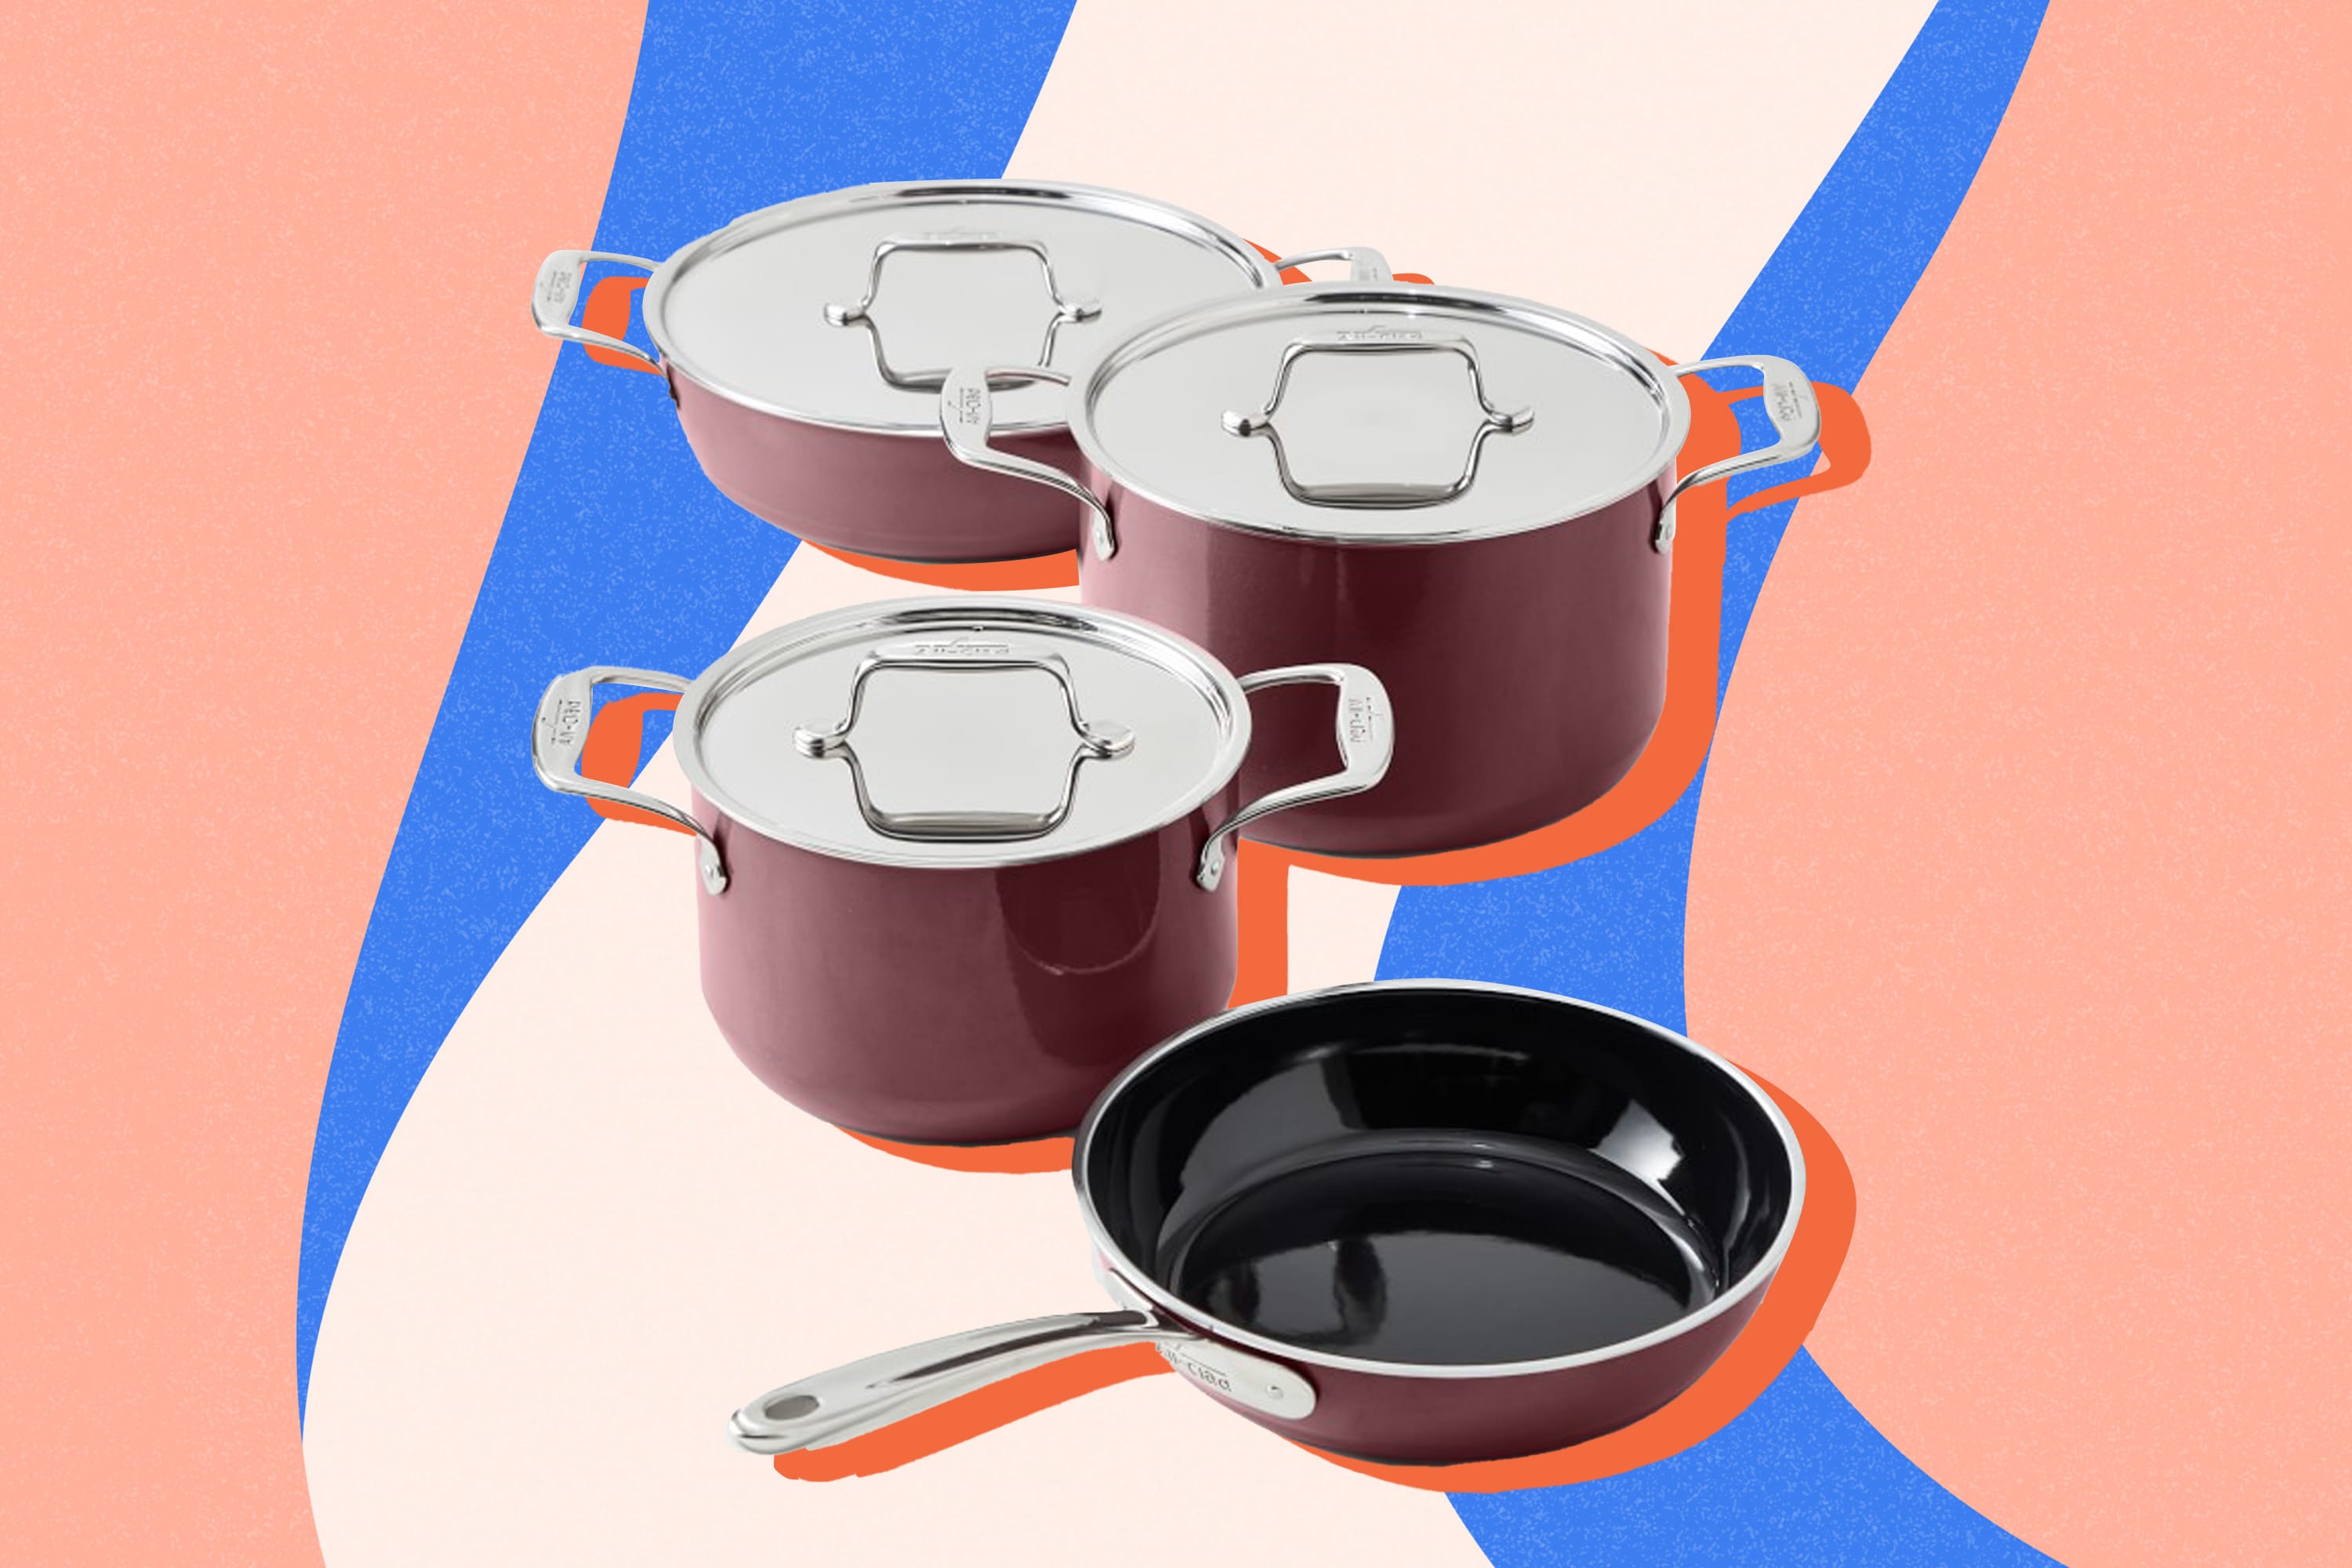 All-Clad cookware: Get these top-notch pots and pans for nearly half off